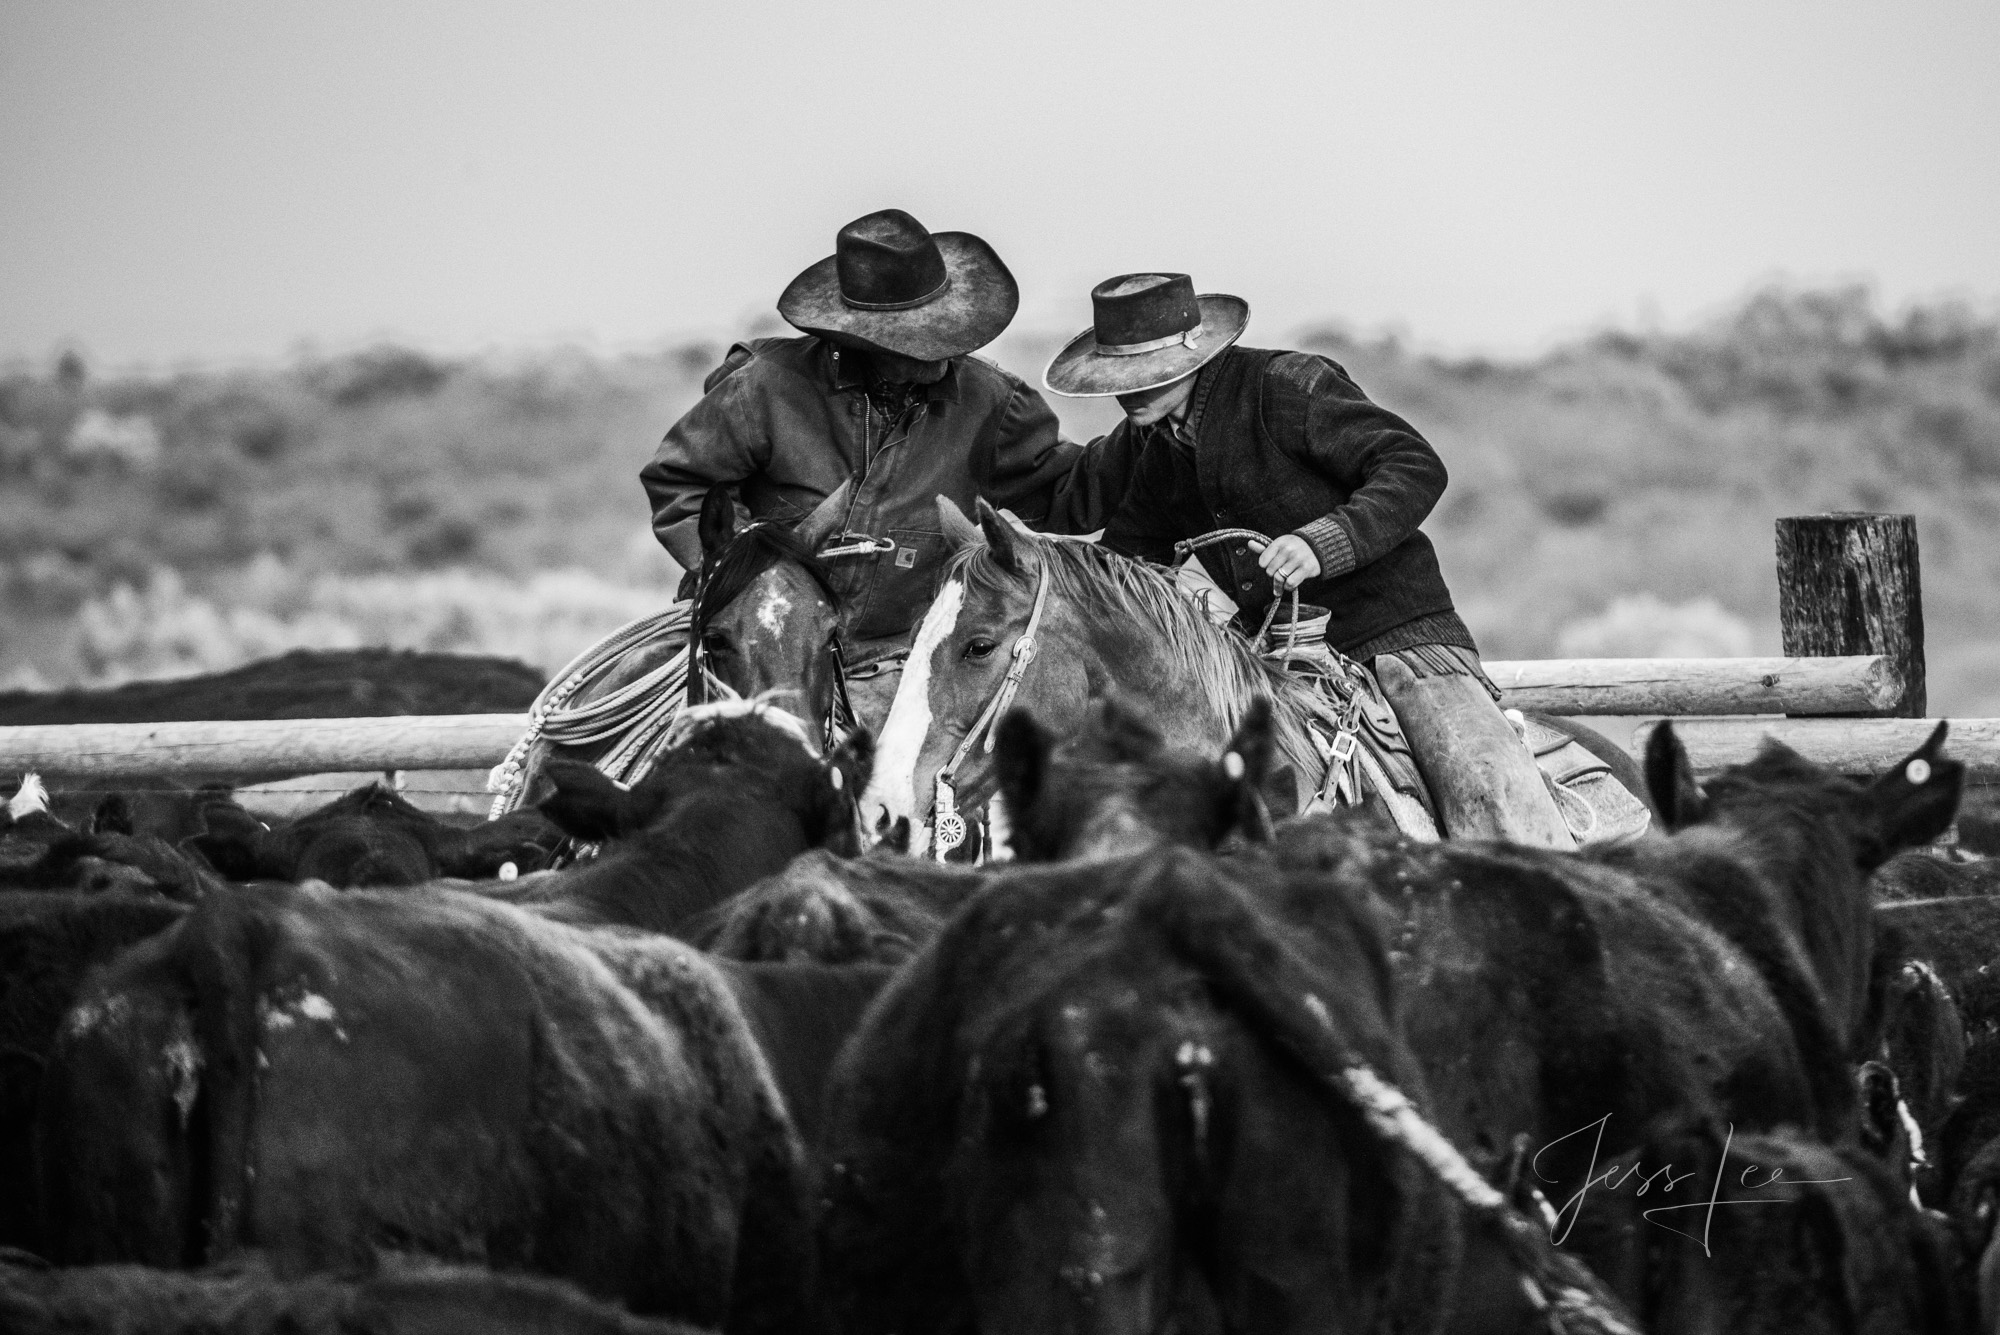 Fine Art Limited Edition Photo Prints of Cowboys, Horses, and life in the West.  Cowboy pictures in black and white. This is...